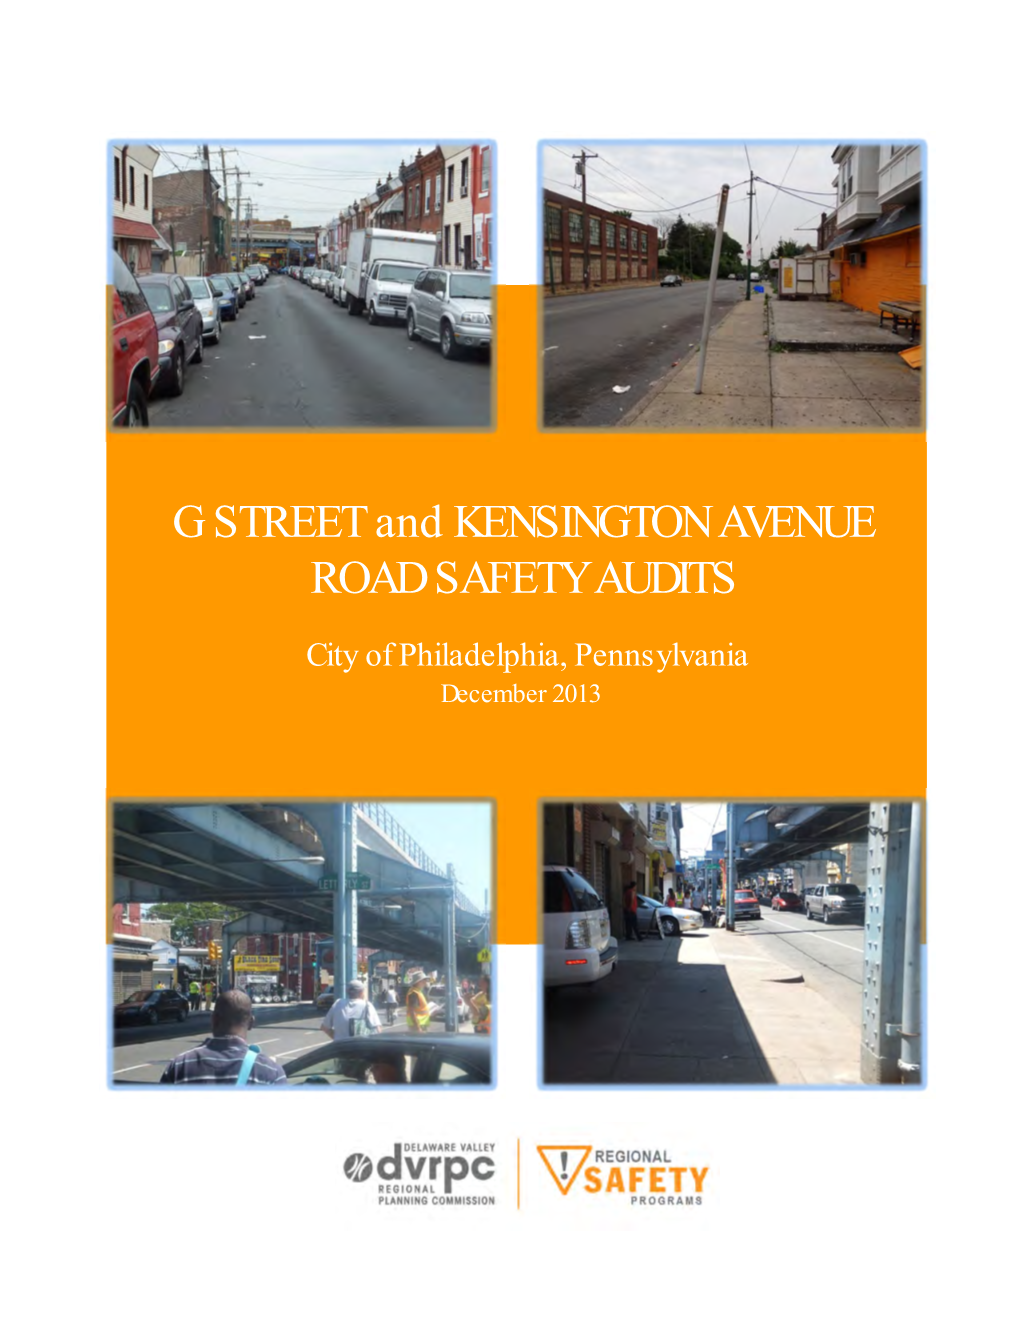 G STREET and KENSINGTON AVENUE ROAD SAFETY AUDITS